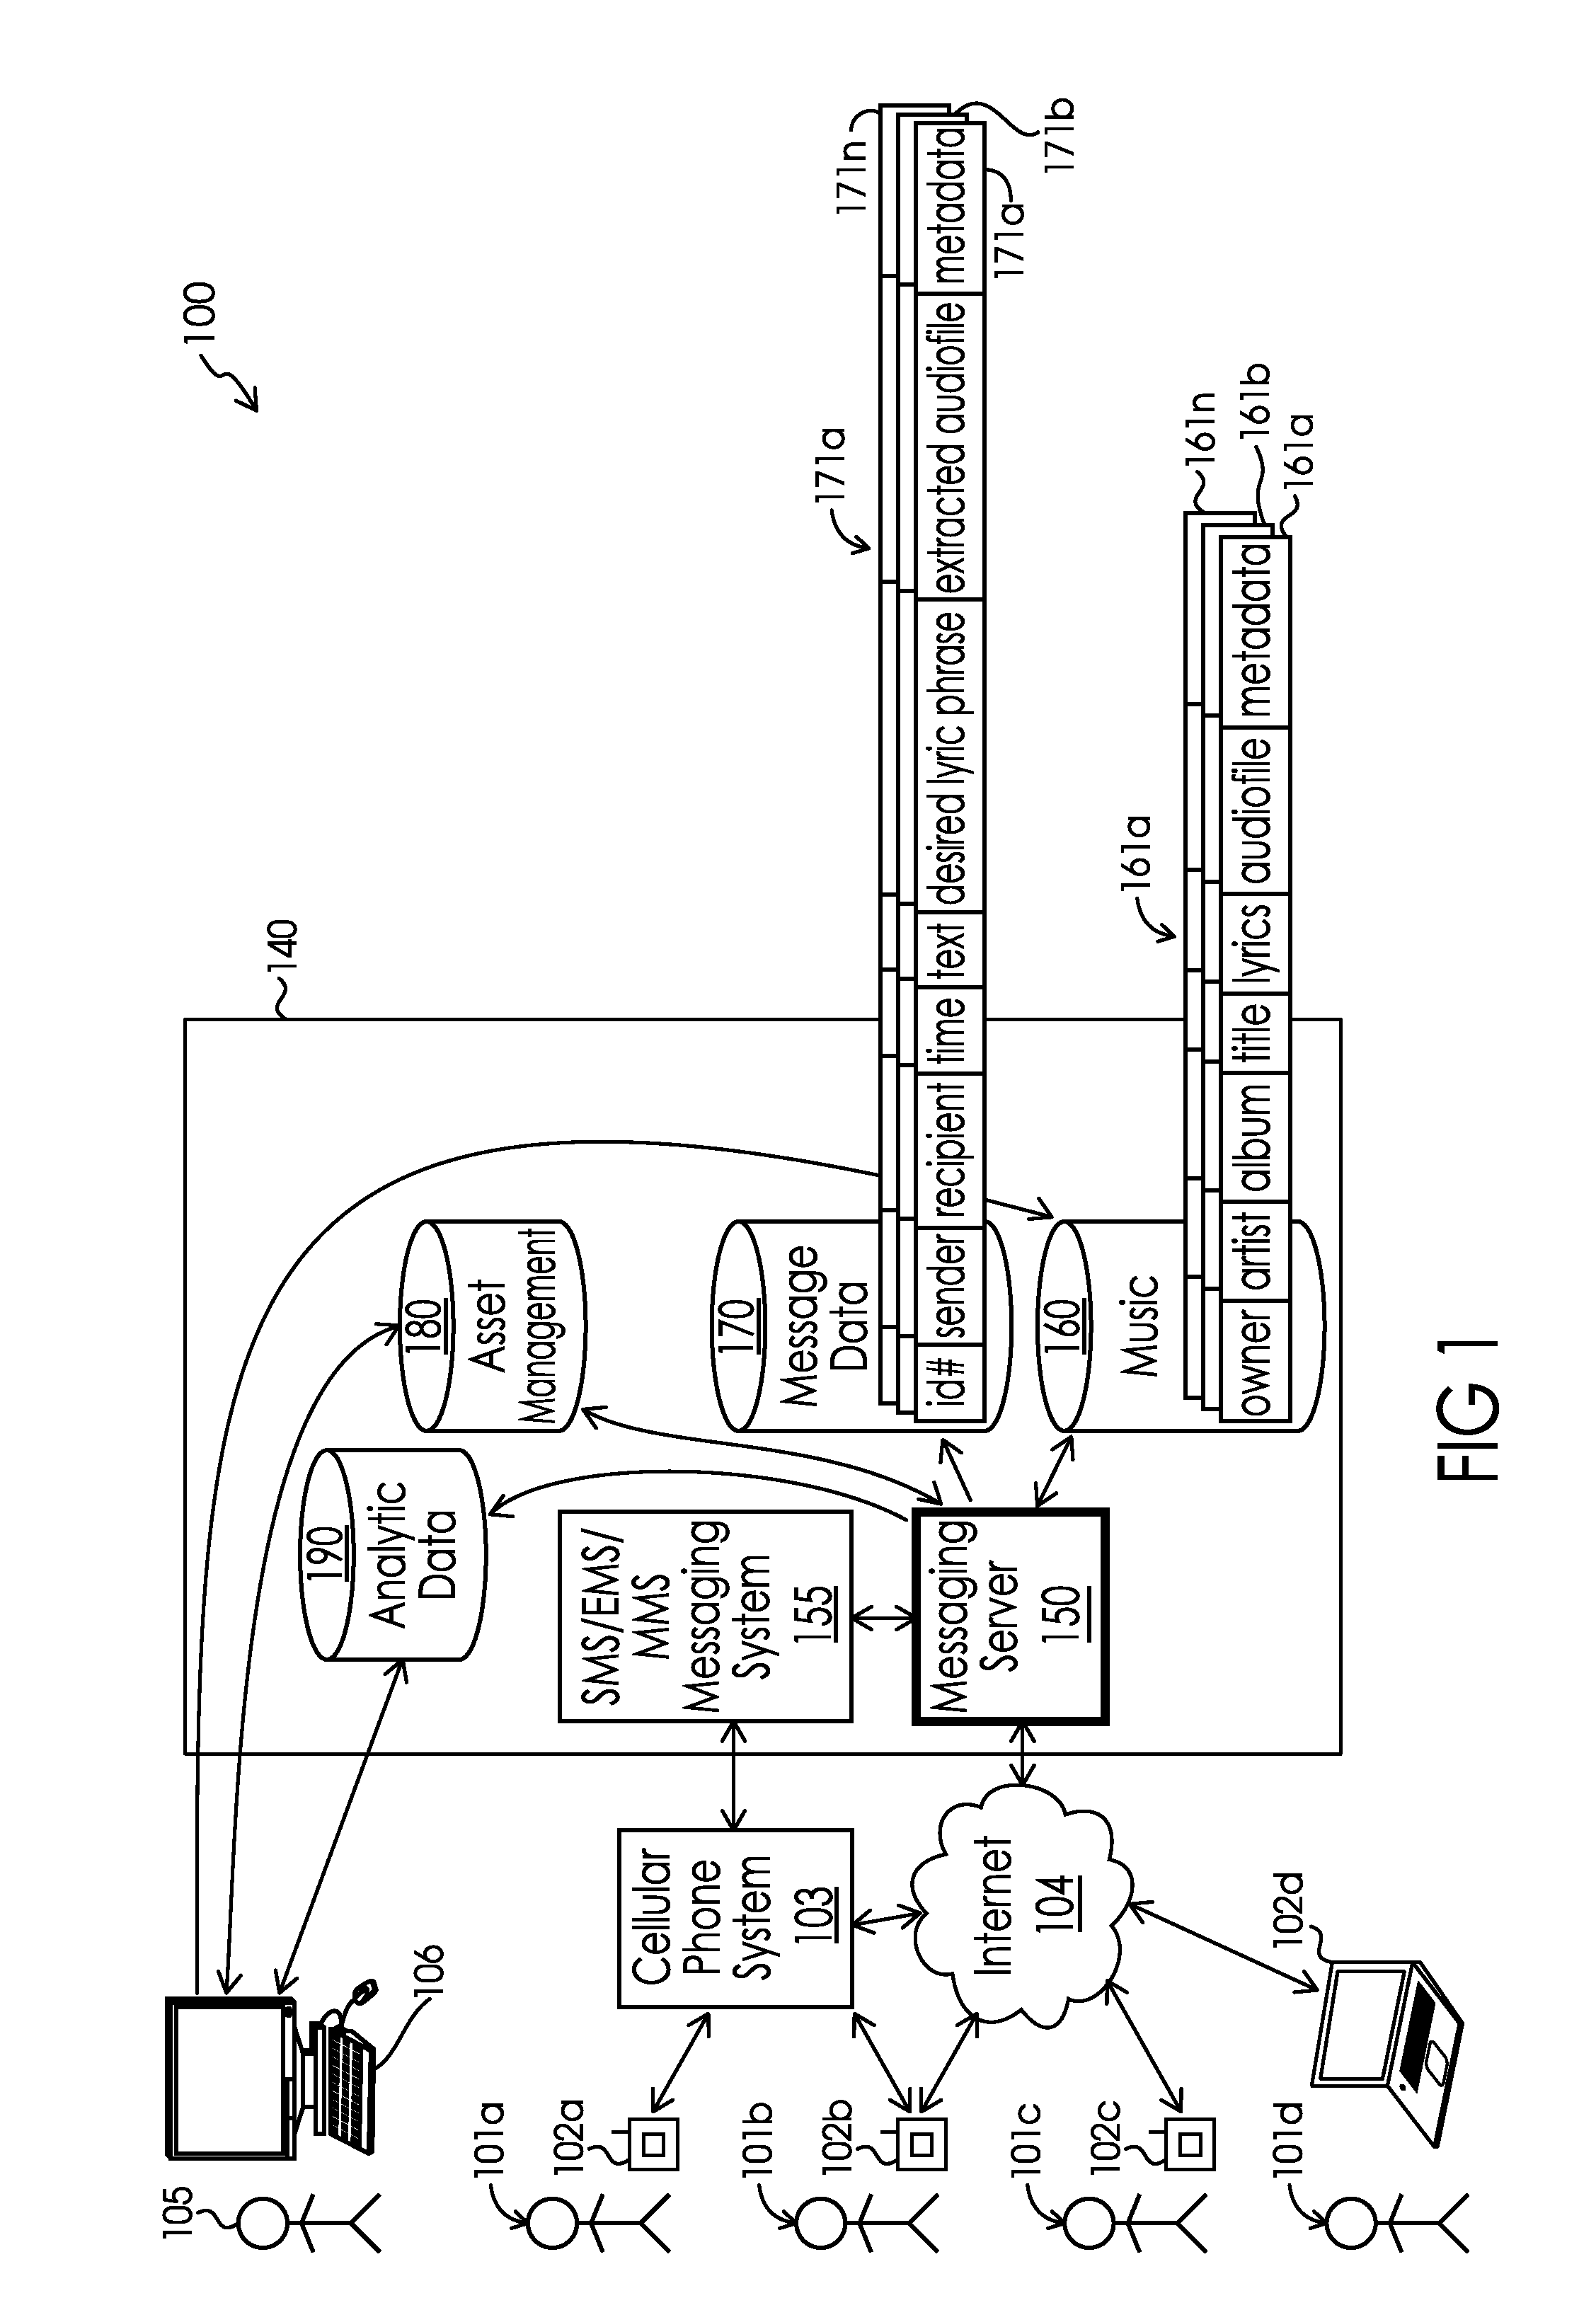 Method and System for Communicating Between a Sender and a Recipient Via a Personalized Message Including an Audio Clip Extracted from a Pre-Existing Recording